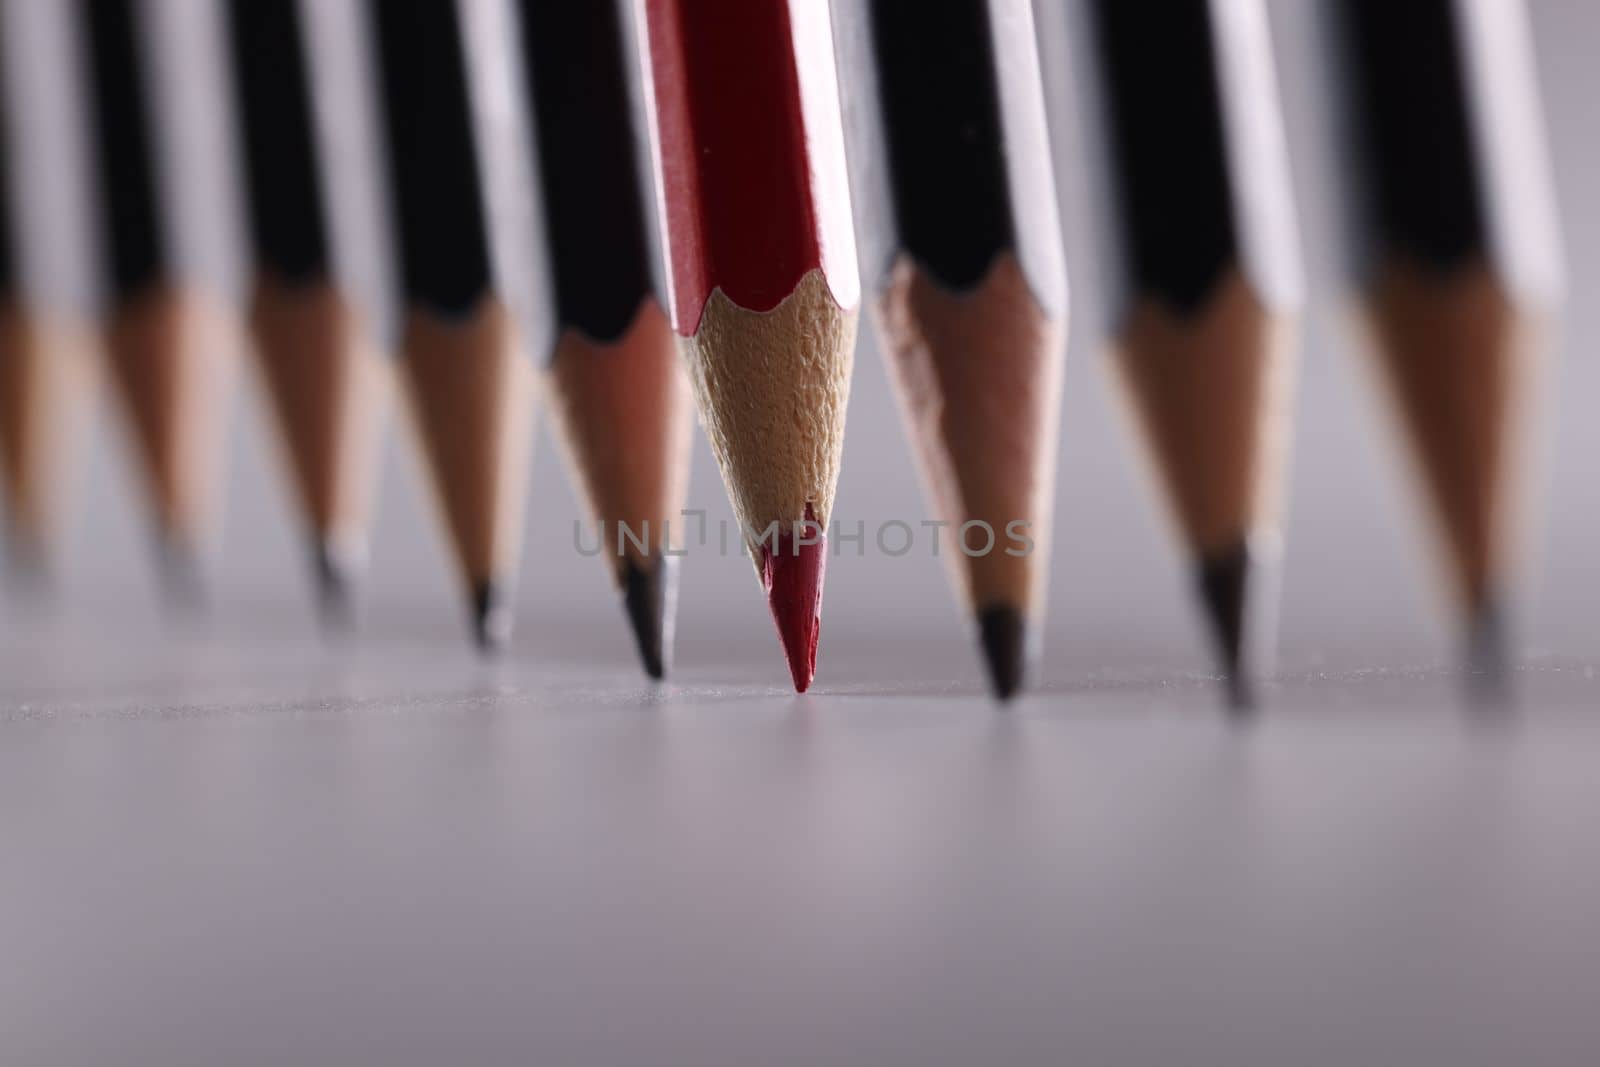 Red pencil stands out from many identical black ones. Uniqueness independence business success concept